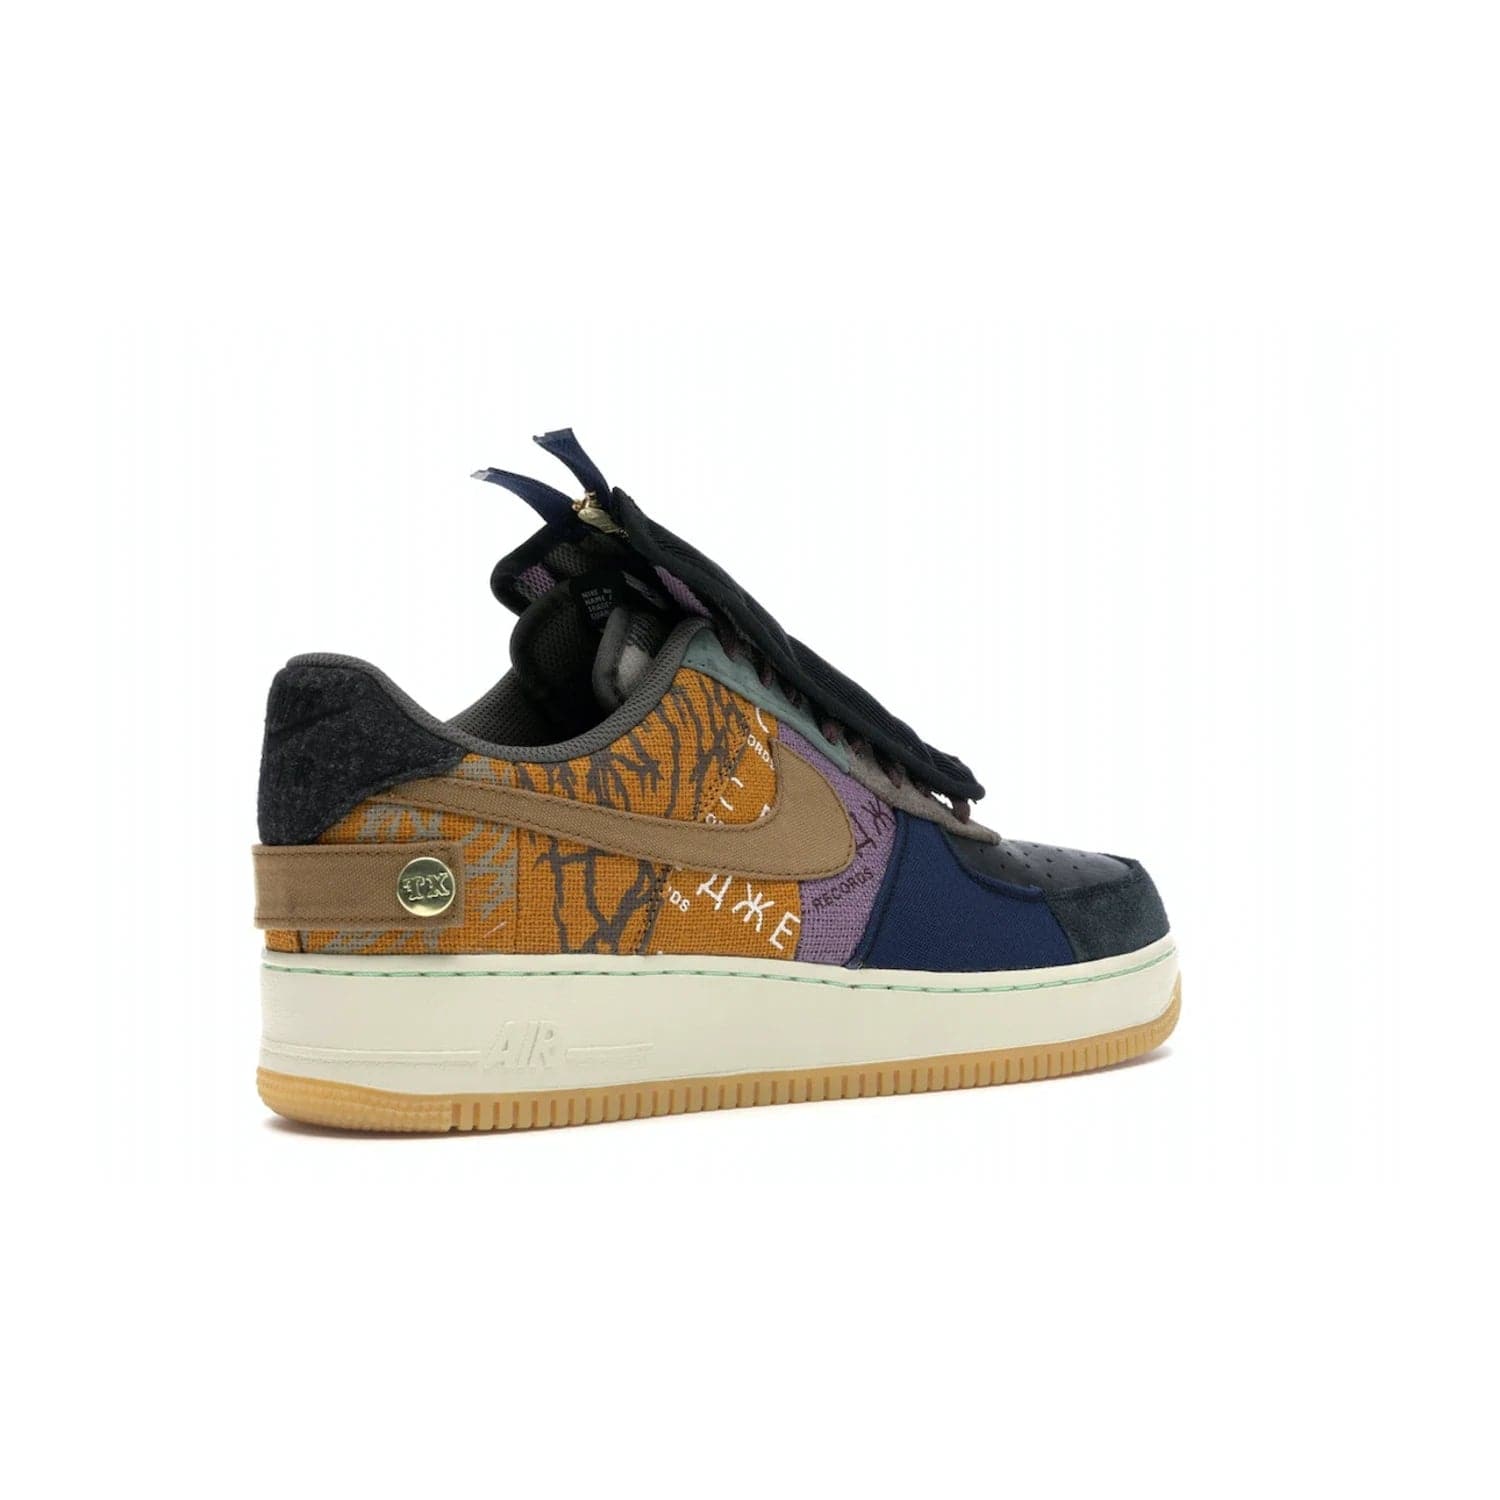 Nike Air Force 1 Low Travis Scott Cactus Jack - Image 33 - Only at www.BallersClubKickz.com - The Nike Air Force 1 Low Travis Scott Cactus Jack features a unique, multi-colored patchwork upper with muted bronze and fossil accents. Includes detachable lace cover, brass zipper, and Cactus Jack insignias. A sail midsole, gum rubber outsole complete the eye-catching design. Perfect for comfort and style with unexpected touches of detail.